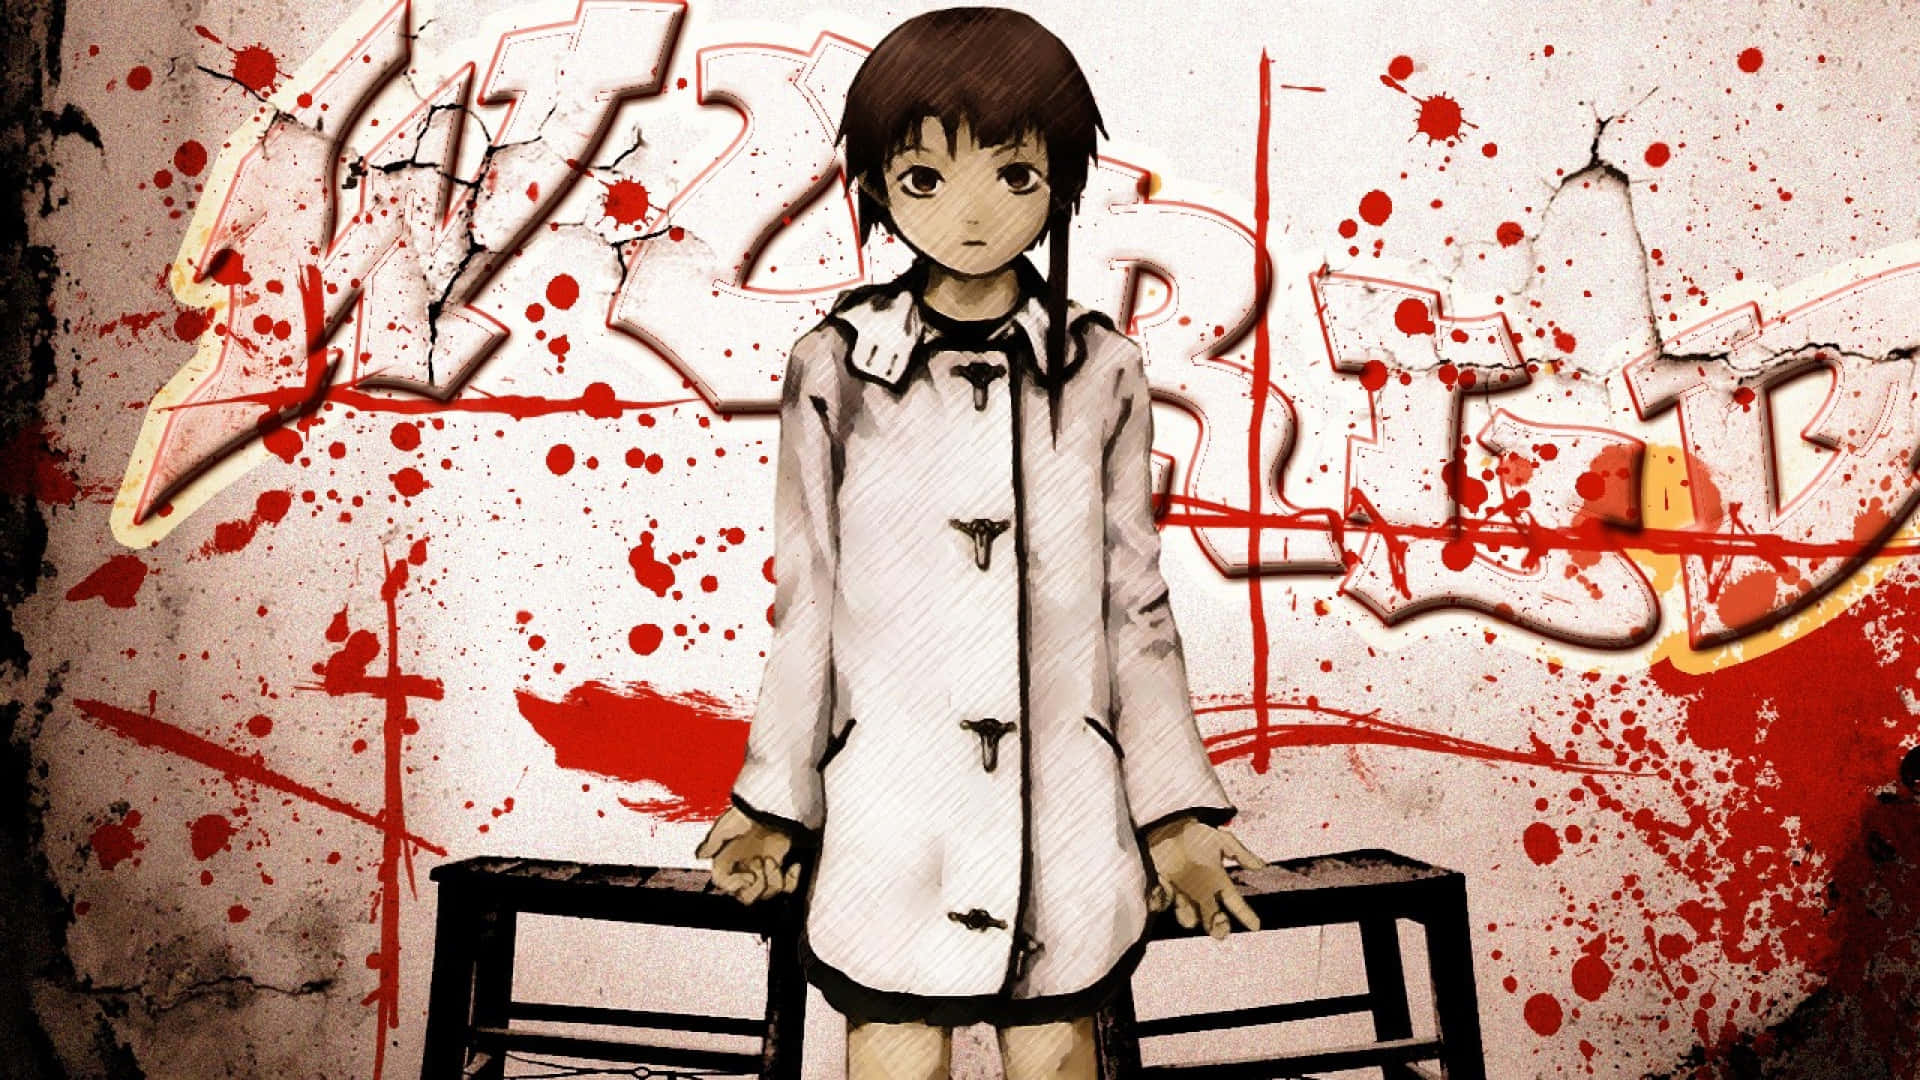 Serial Experiments Lain, a masterpiece of surreal anime Wallpaper